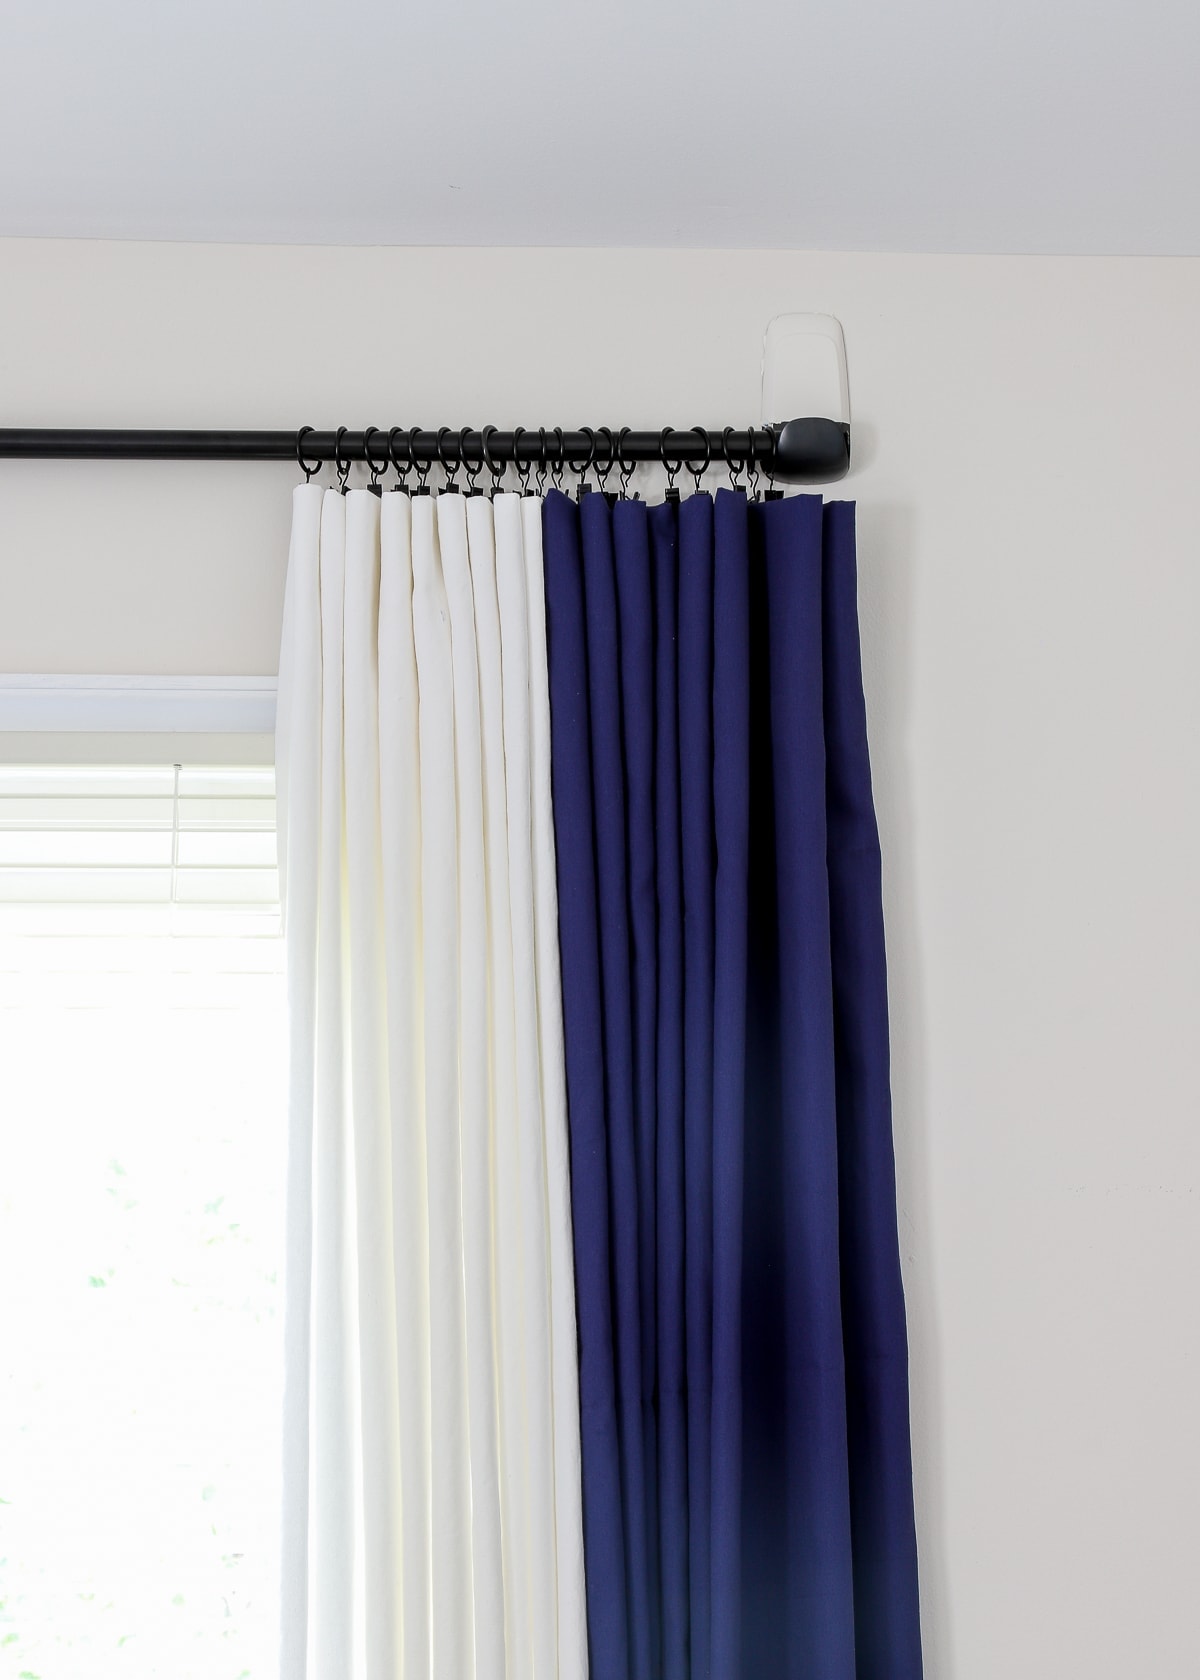 Curtain Rod Without Drilling, How To Hang Curtains Without Command Hooks